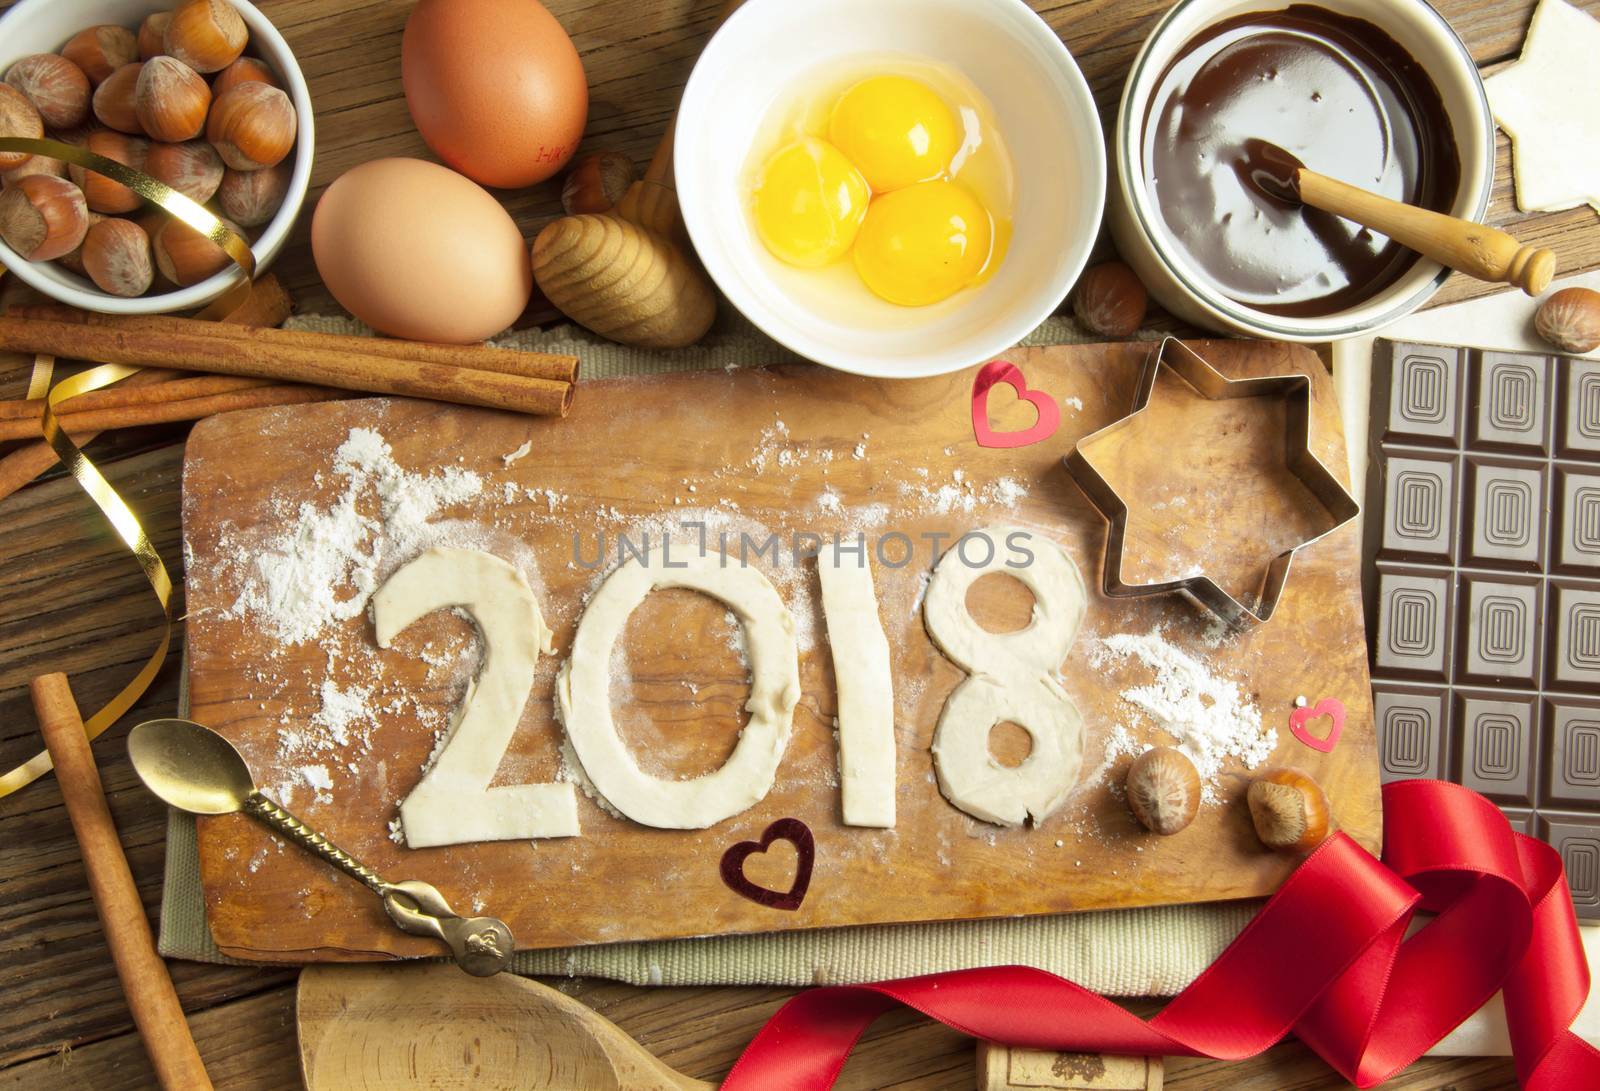 2018 made with pastry and fresh baking ingredients 